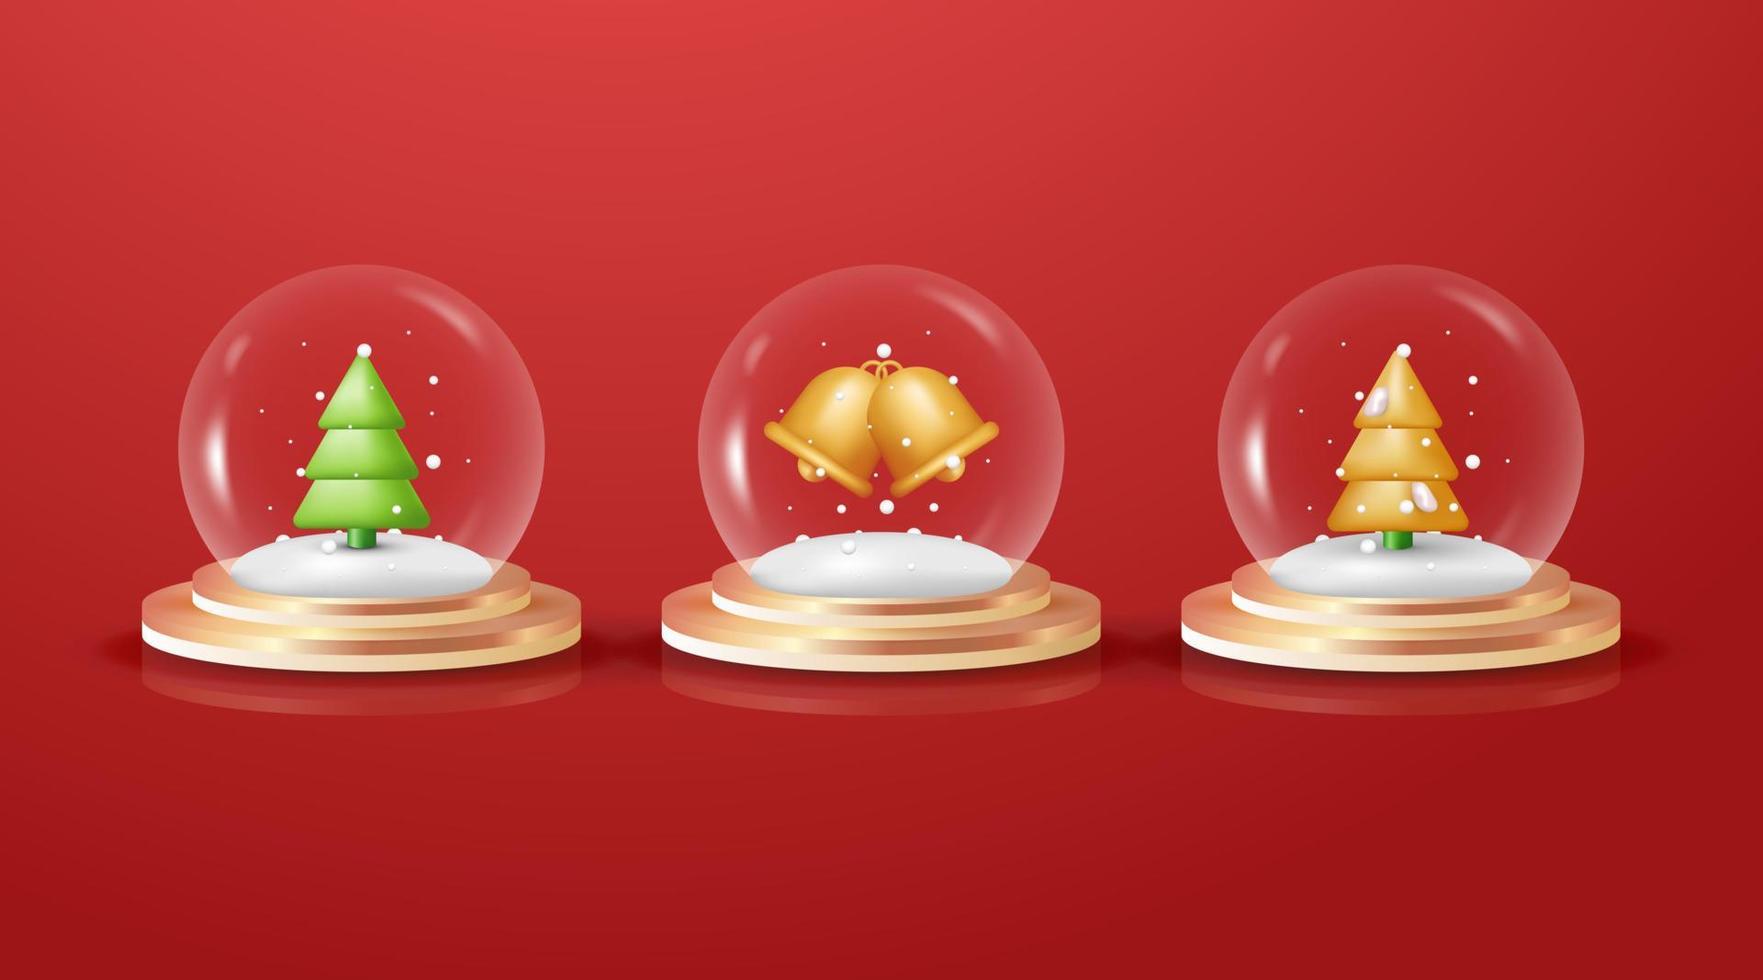 3d christmas decorative design of glass snow globe with golden podium under transparent glass dome with white snow, golden christmas tree, isolated on red background vector